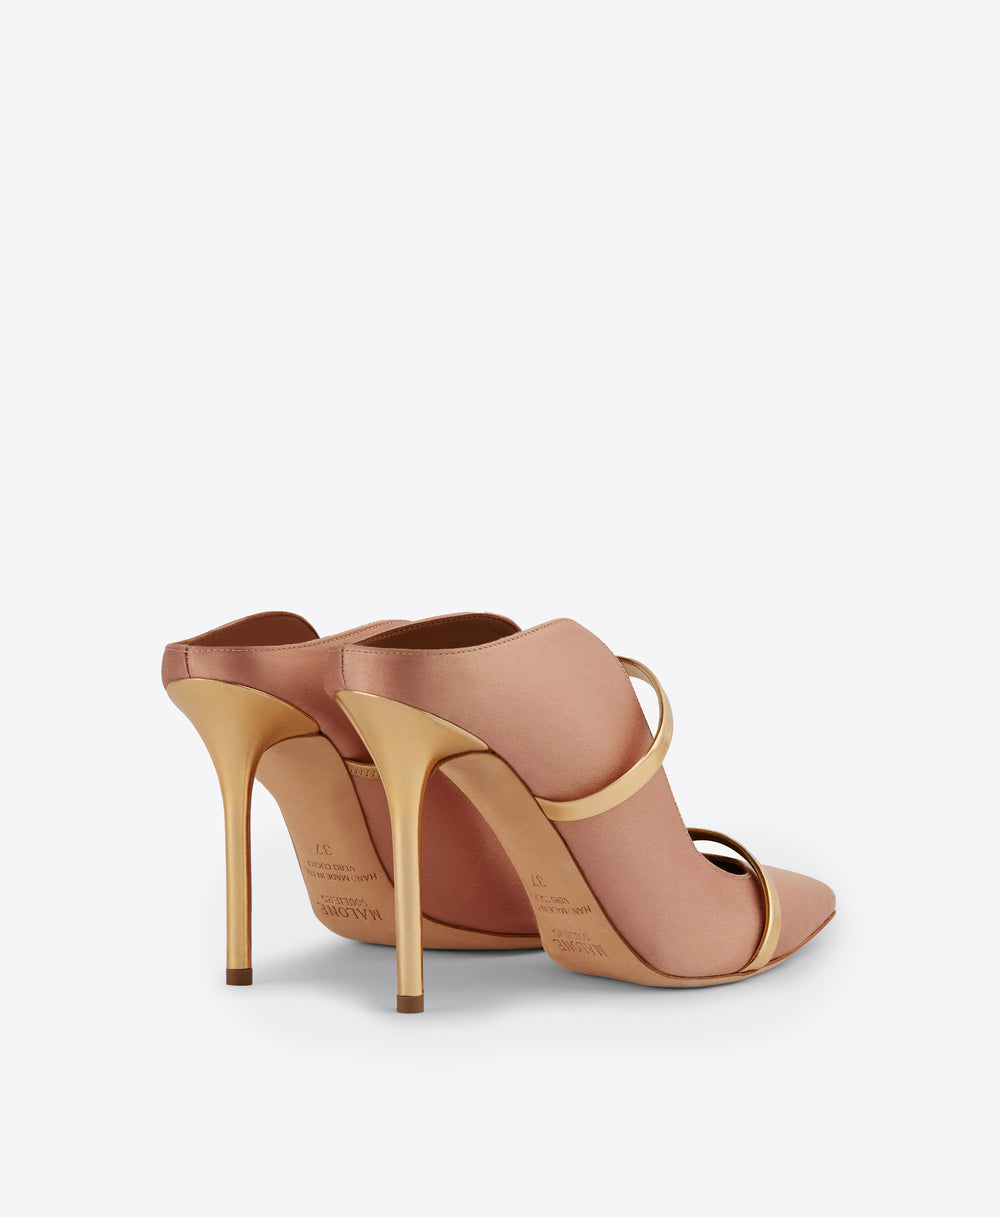 Women's Blush Pink Satin Heeled Mules With Pointed Toe Malone Souliers